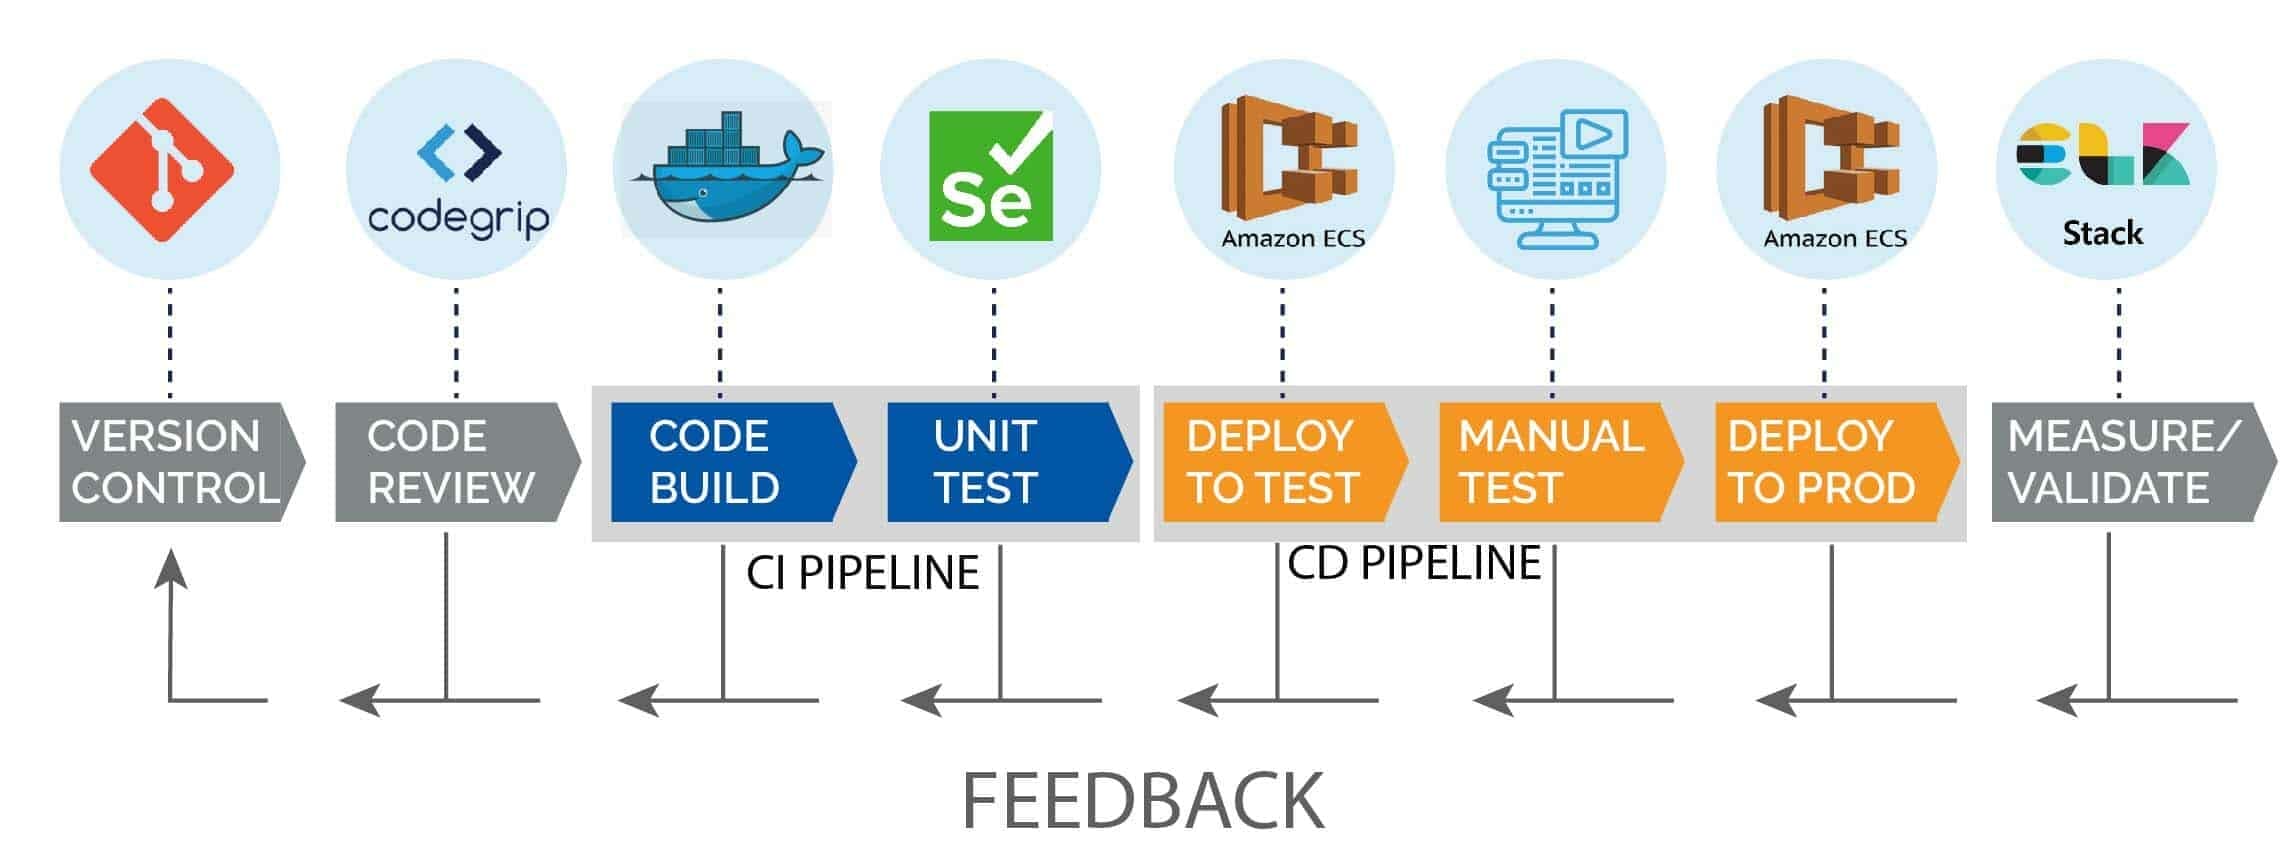 Sample Pipeline Architecture For Code Flow